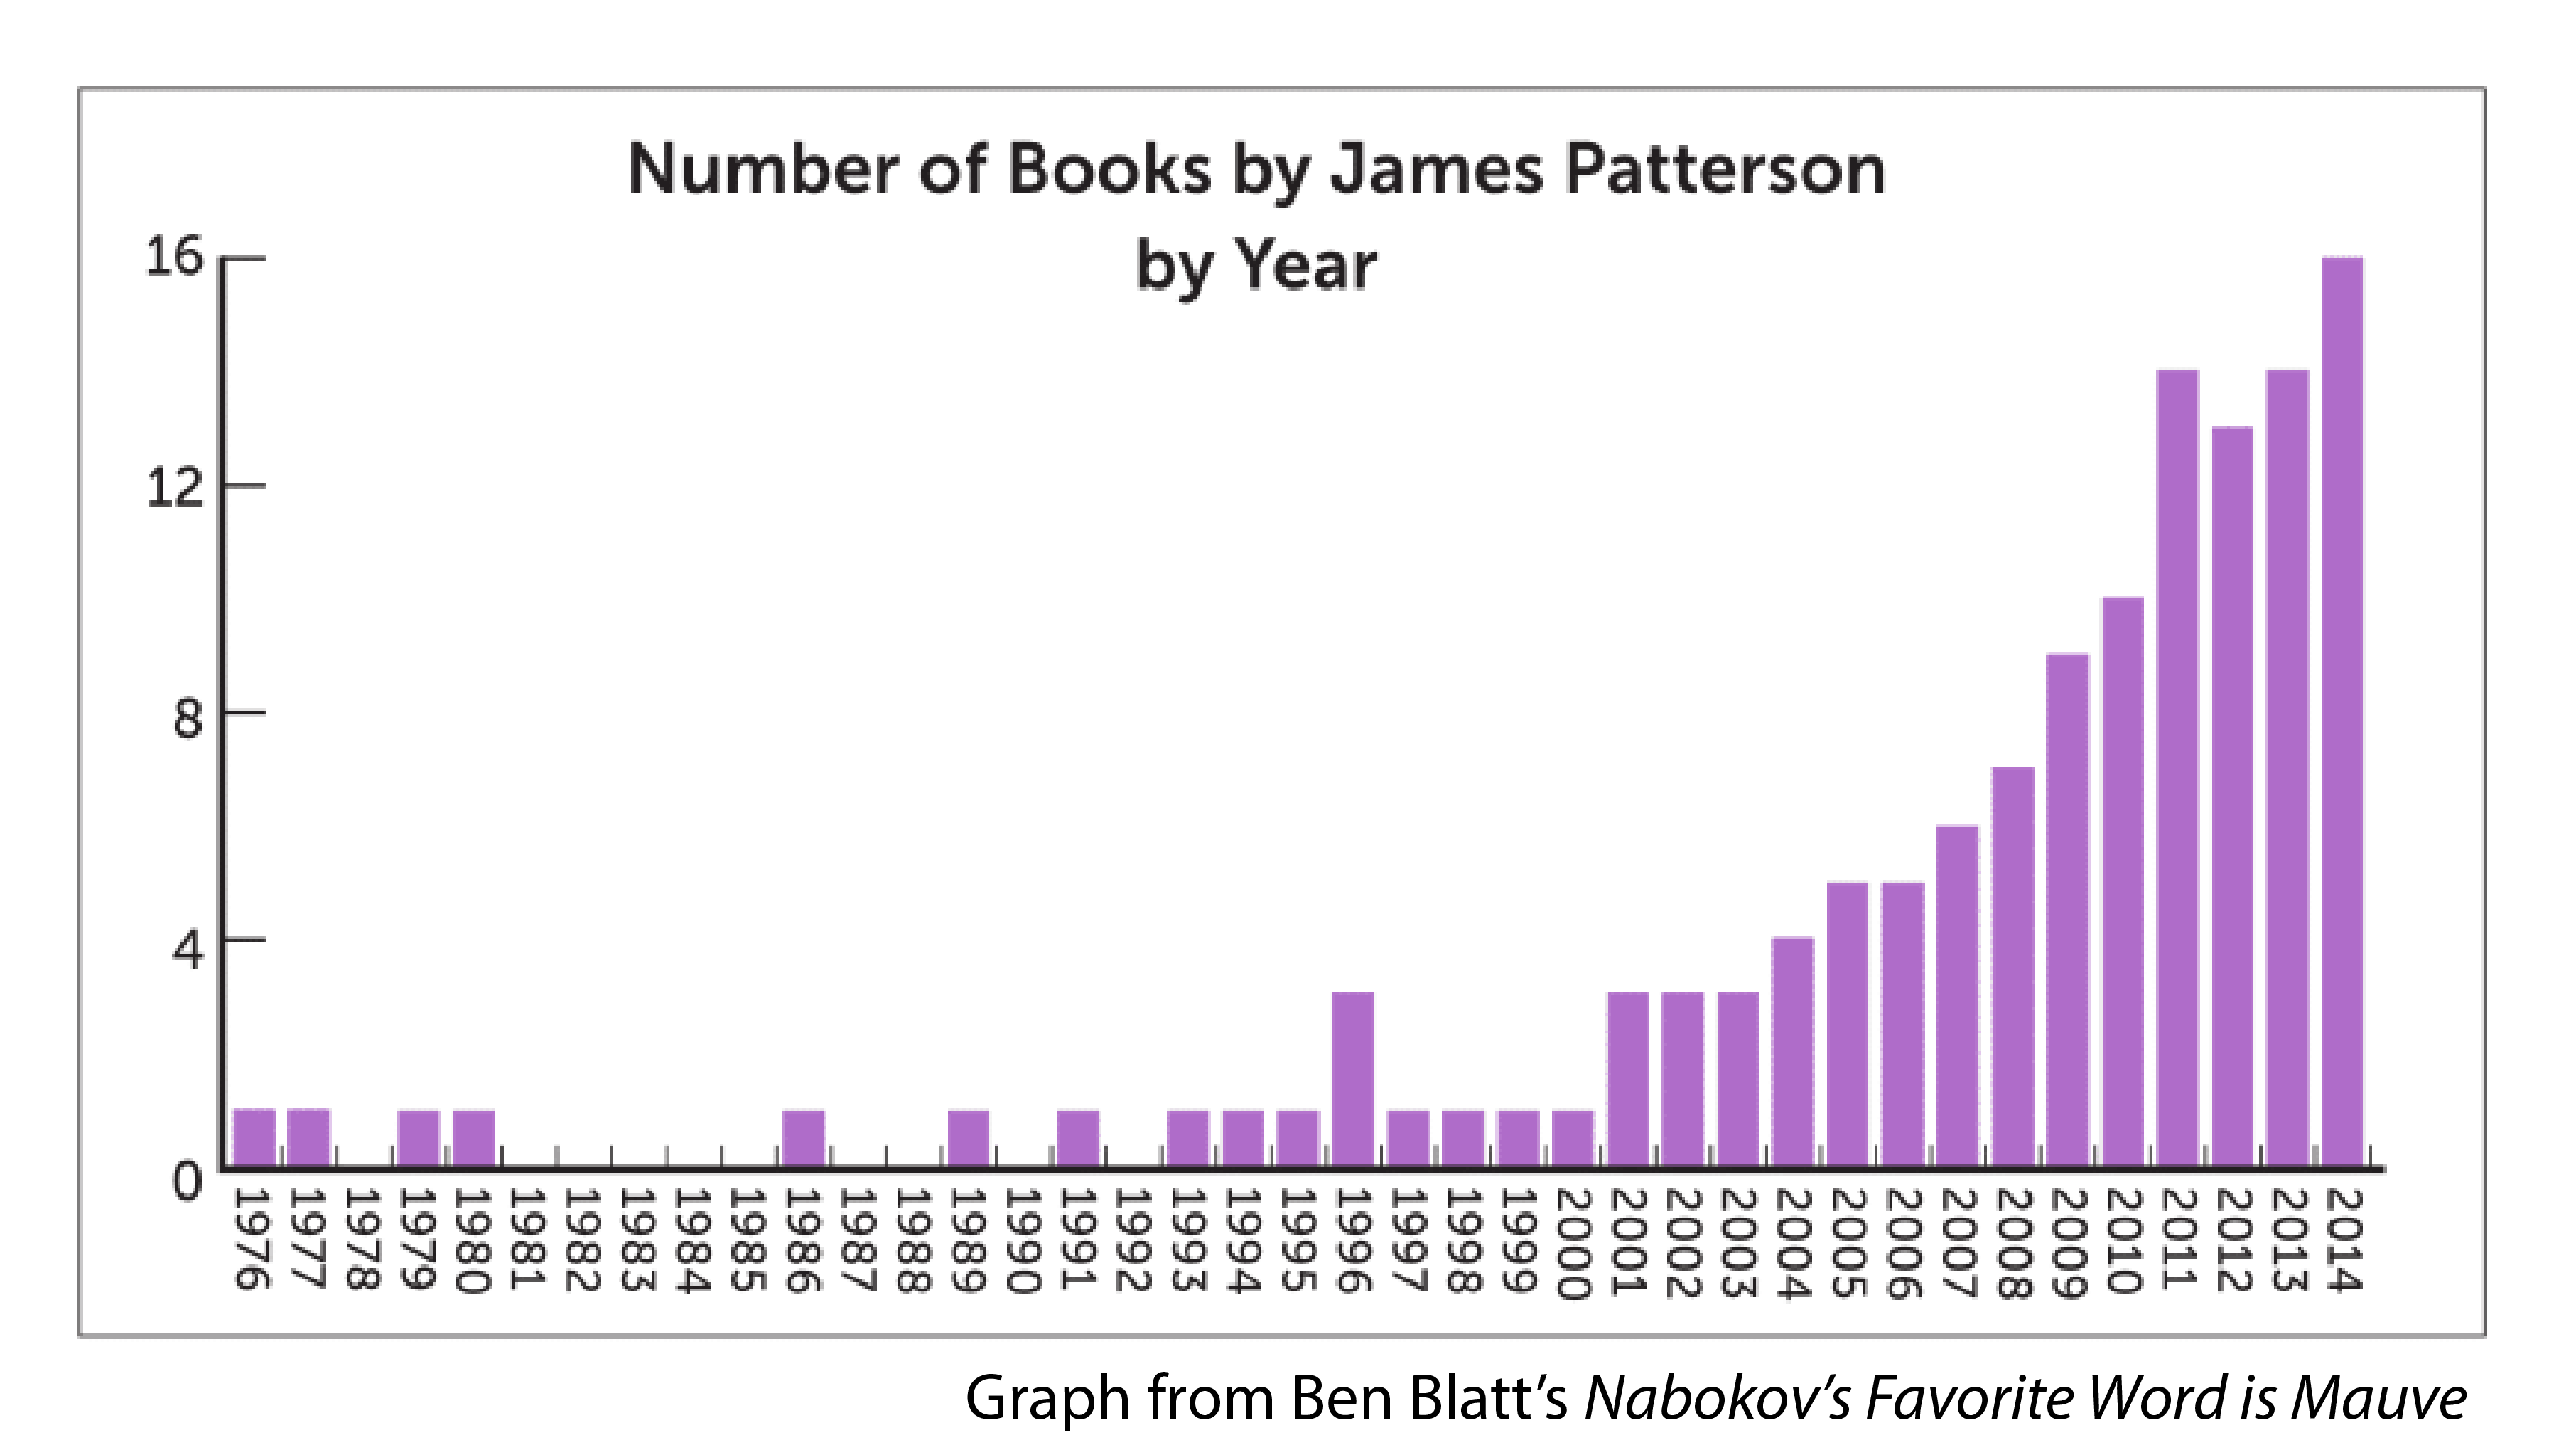 A graph: Number of Books by James Patterson by Year